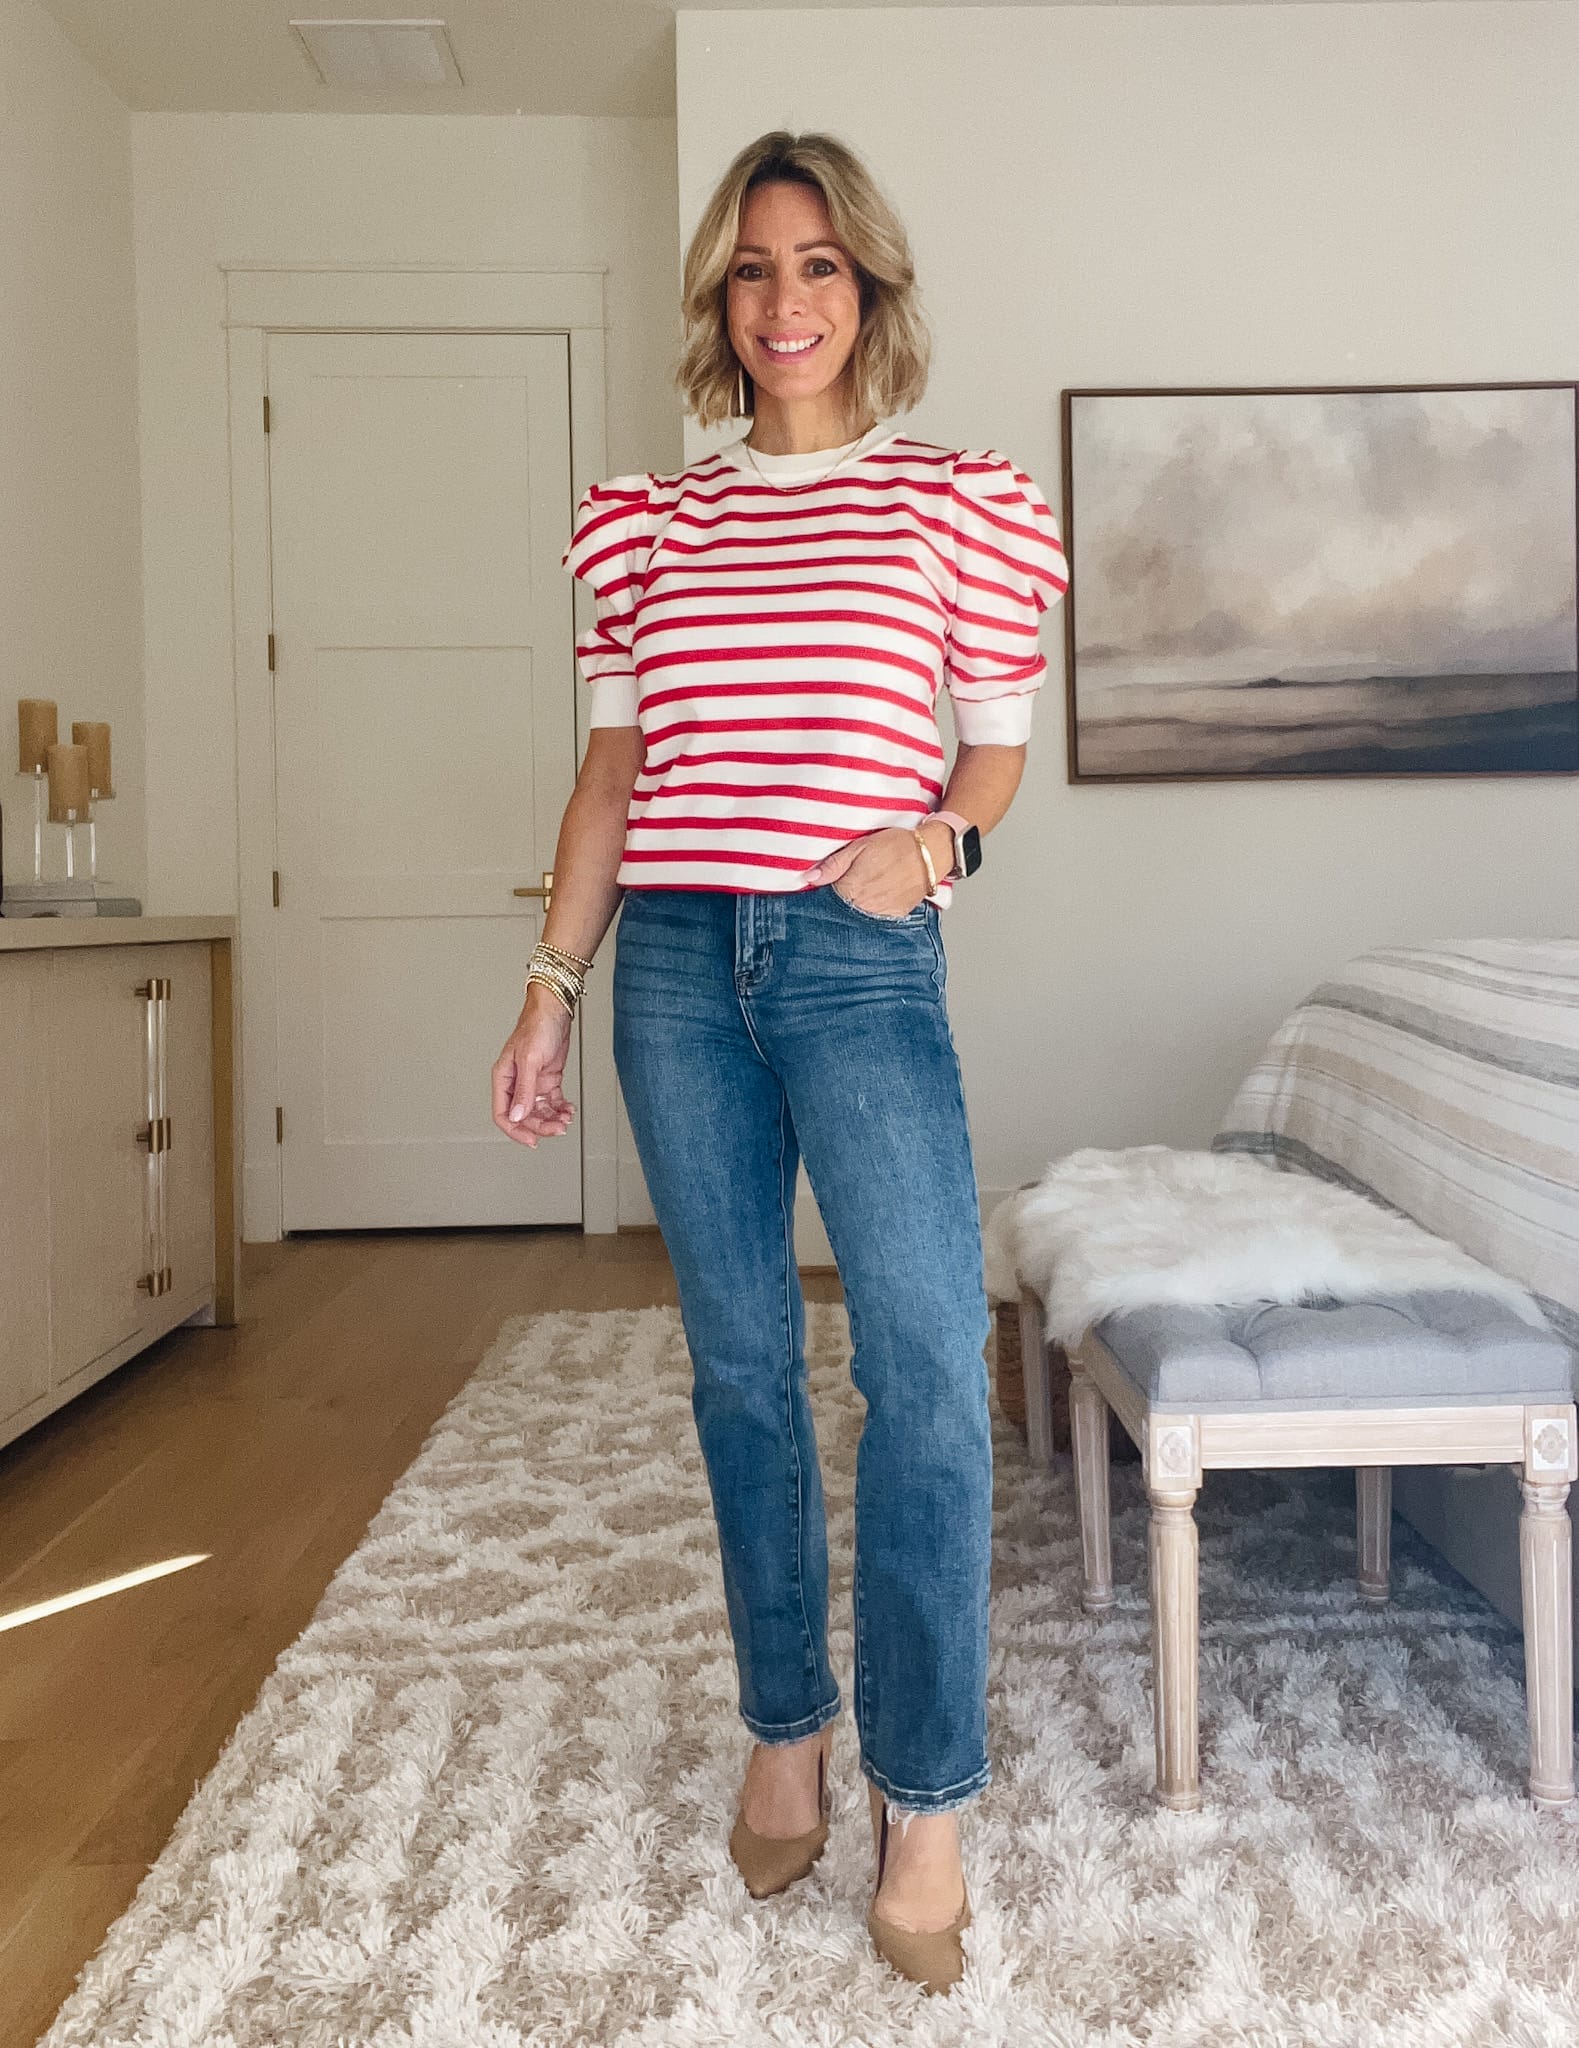 Red White Striped Top, Jeans, Heels 